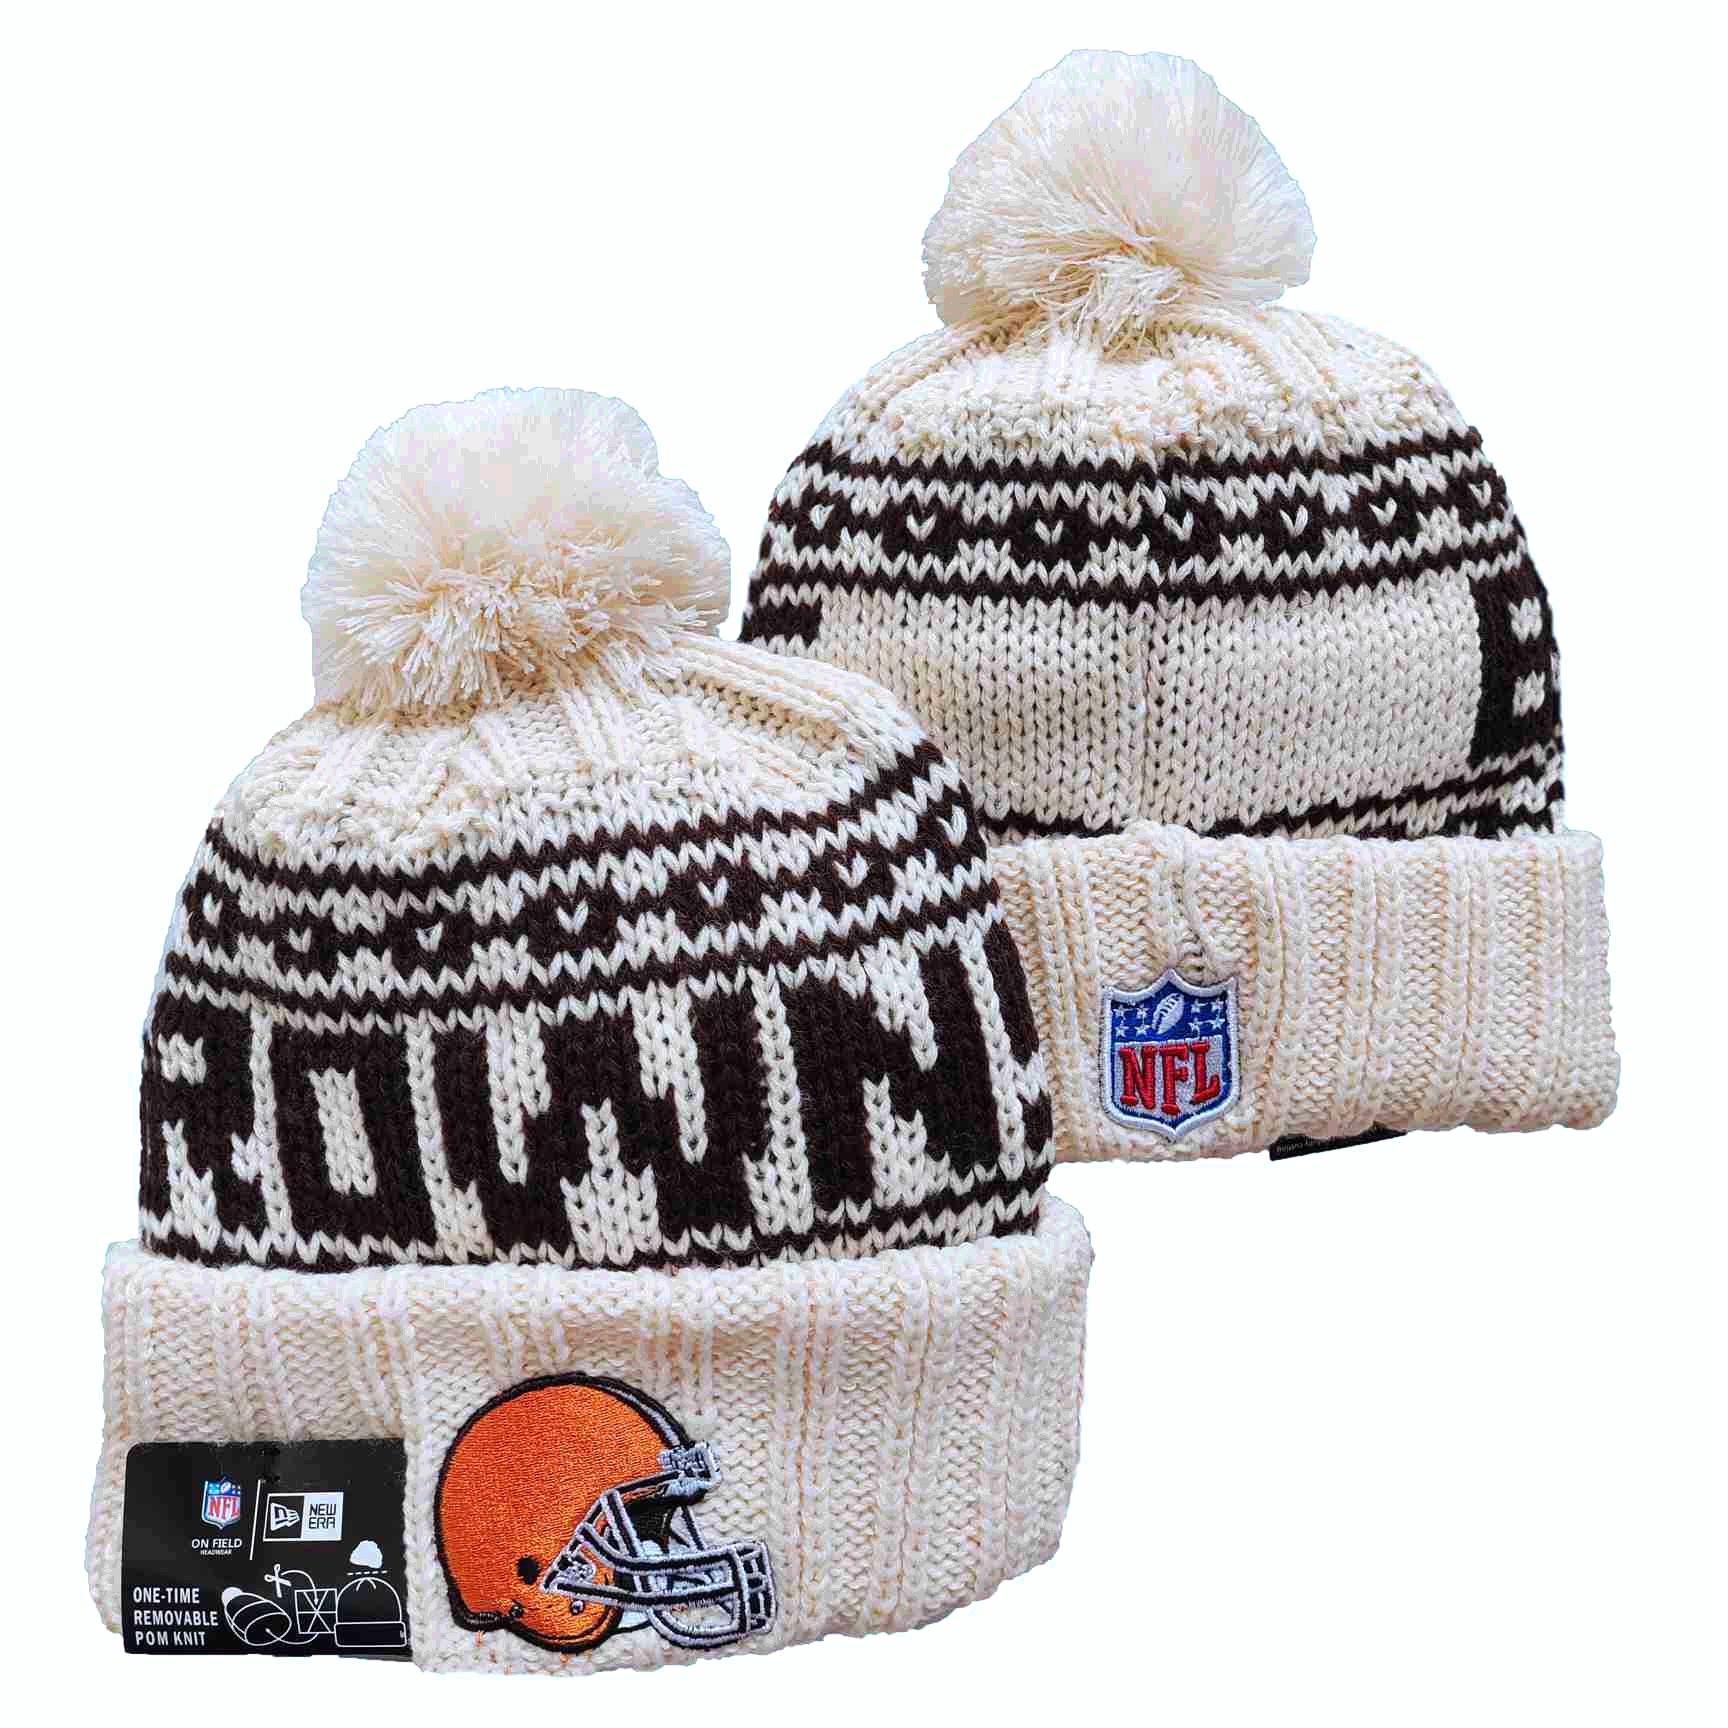 NFL Cleveland Browns Beanies Knit Hats-YD1295